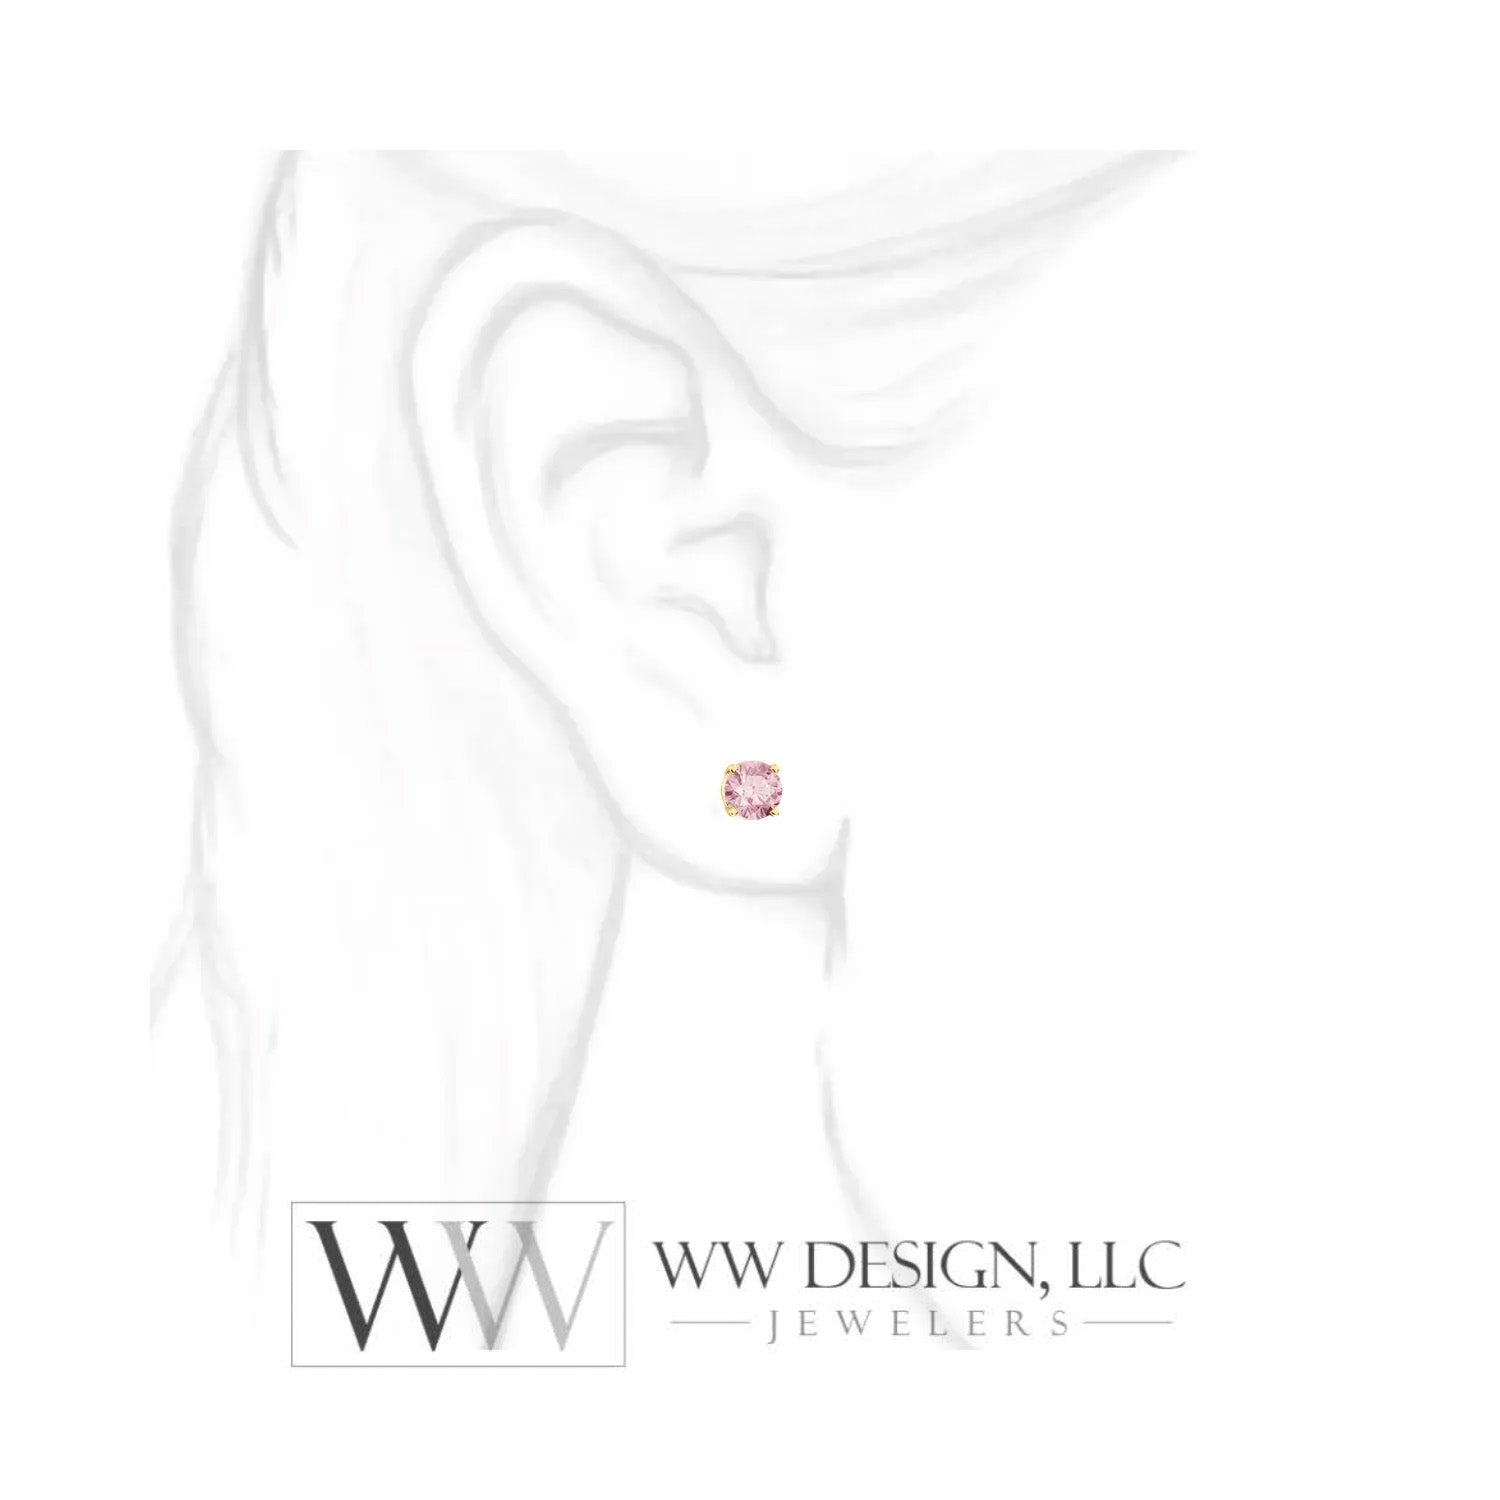 Genuine AA Pink Morganite Earring Studs 5mm 0.96 tcw (each 0.48cts) Post w/ 14k Solid Gold (Yellow, Rose, White)Silver, Platinum Studs - WWDesignJewelers.com